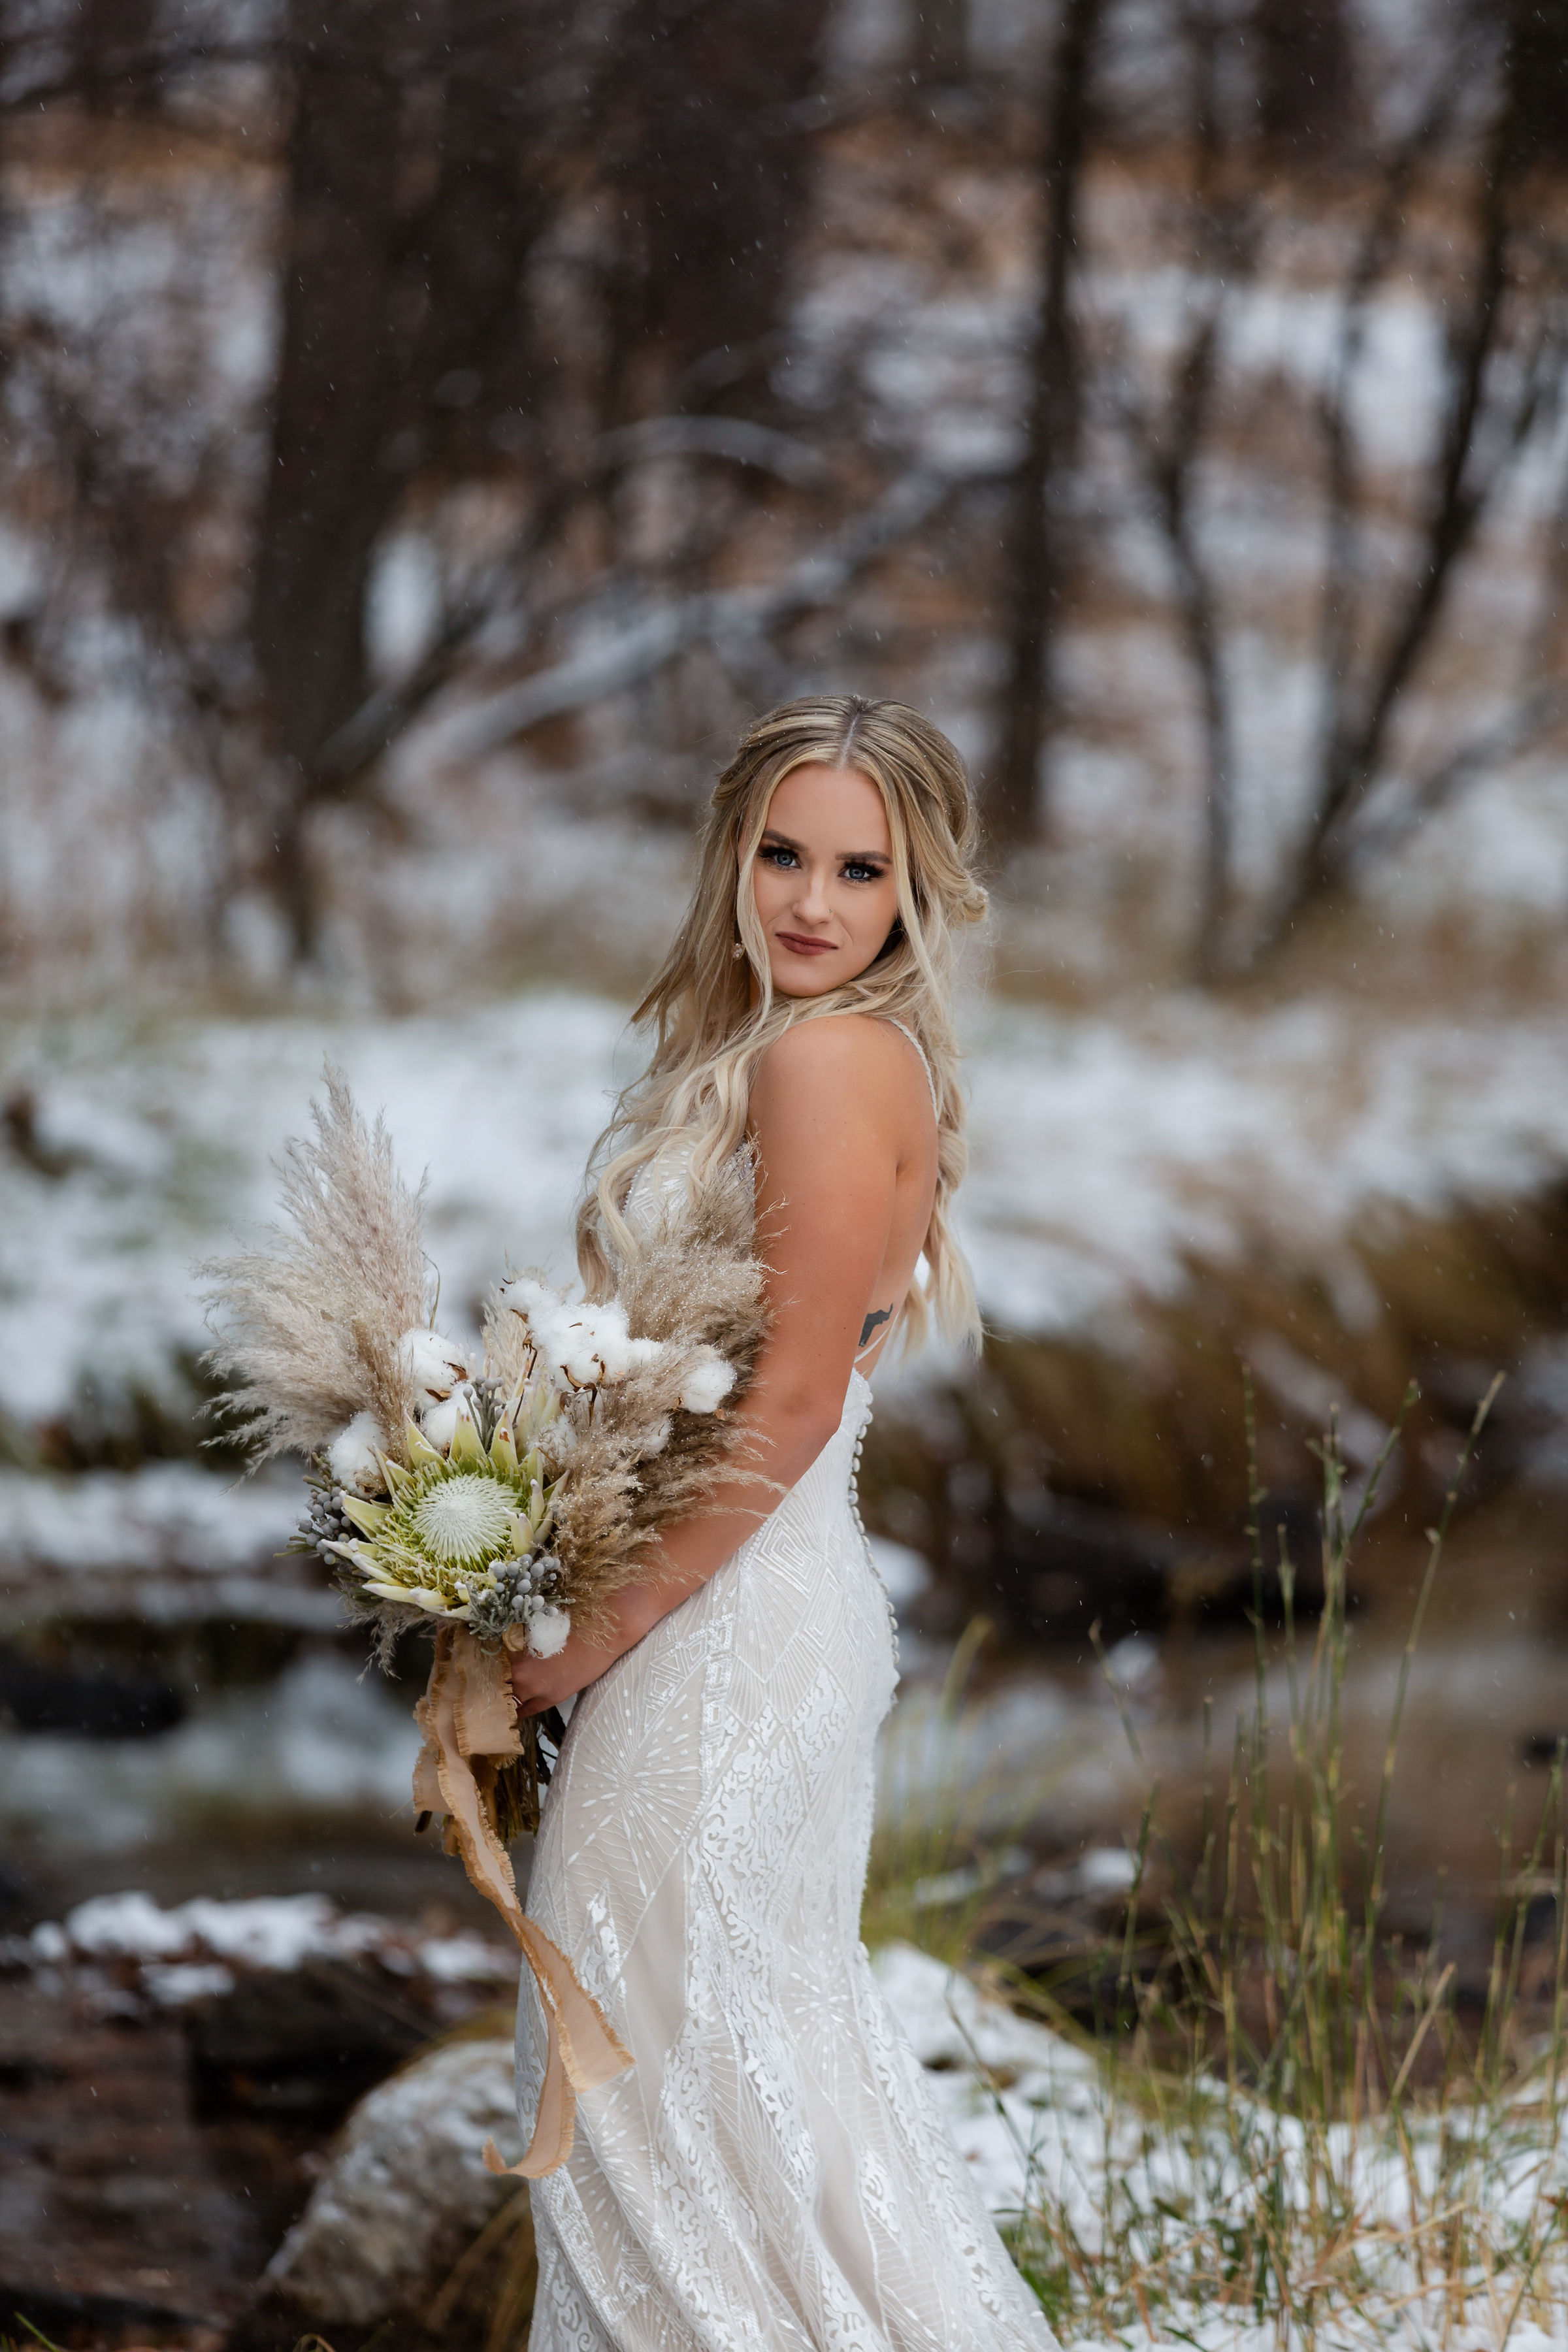 The most beautiful flowers for a winter wedding